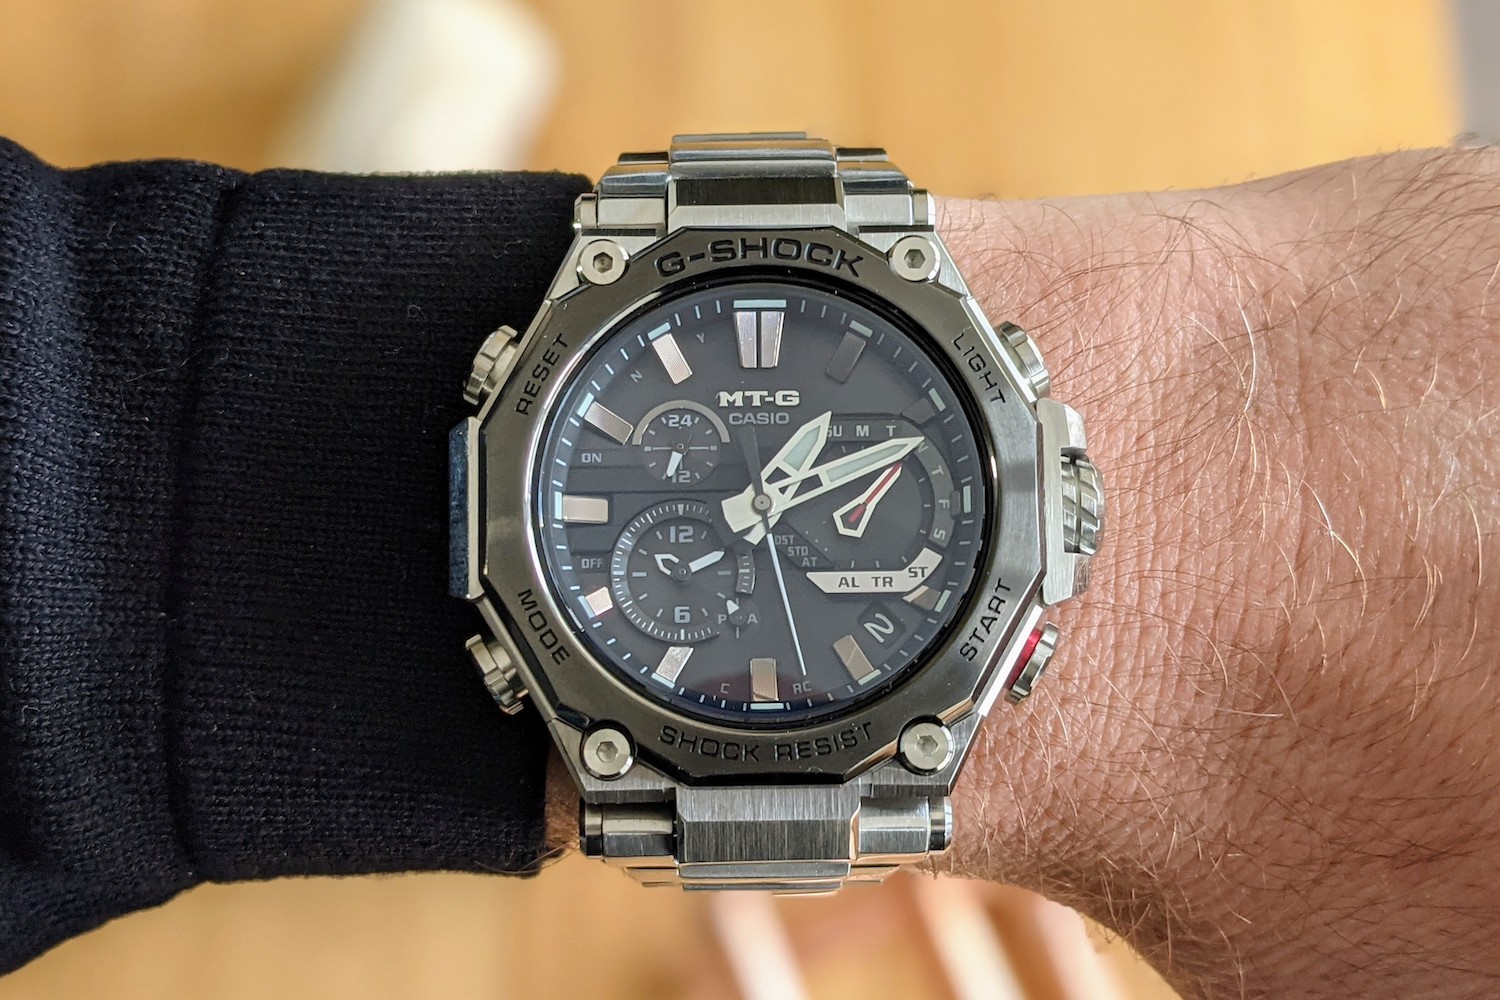 Latest Upscale G-Shock Deserves to be on Your Wrist | Digital Trends